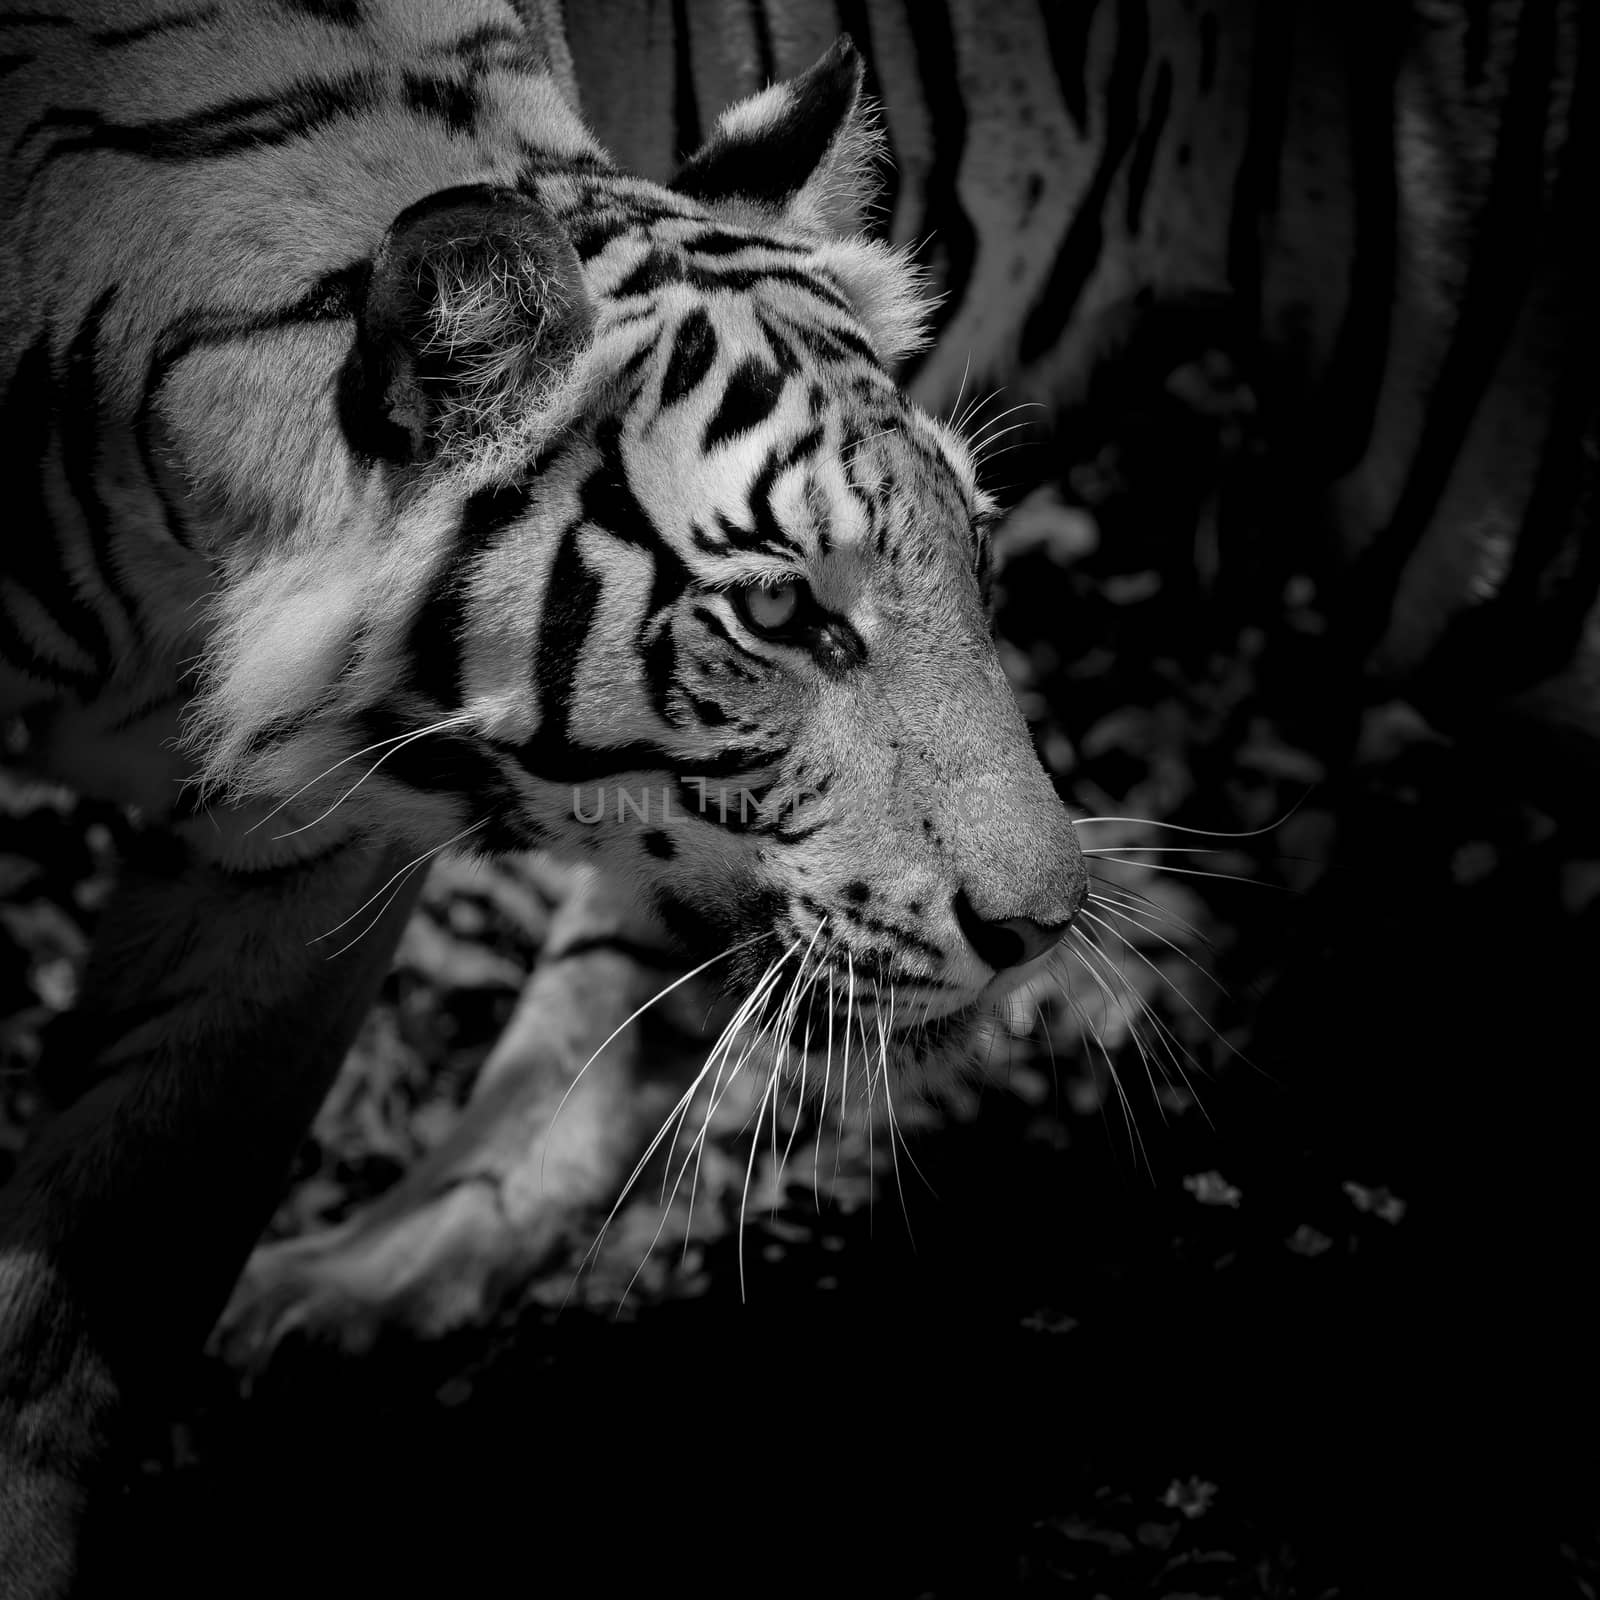 Black & White Beautiful tiger - isolated on black background by art9858